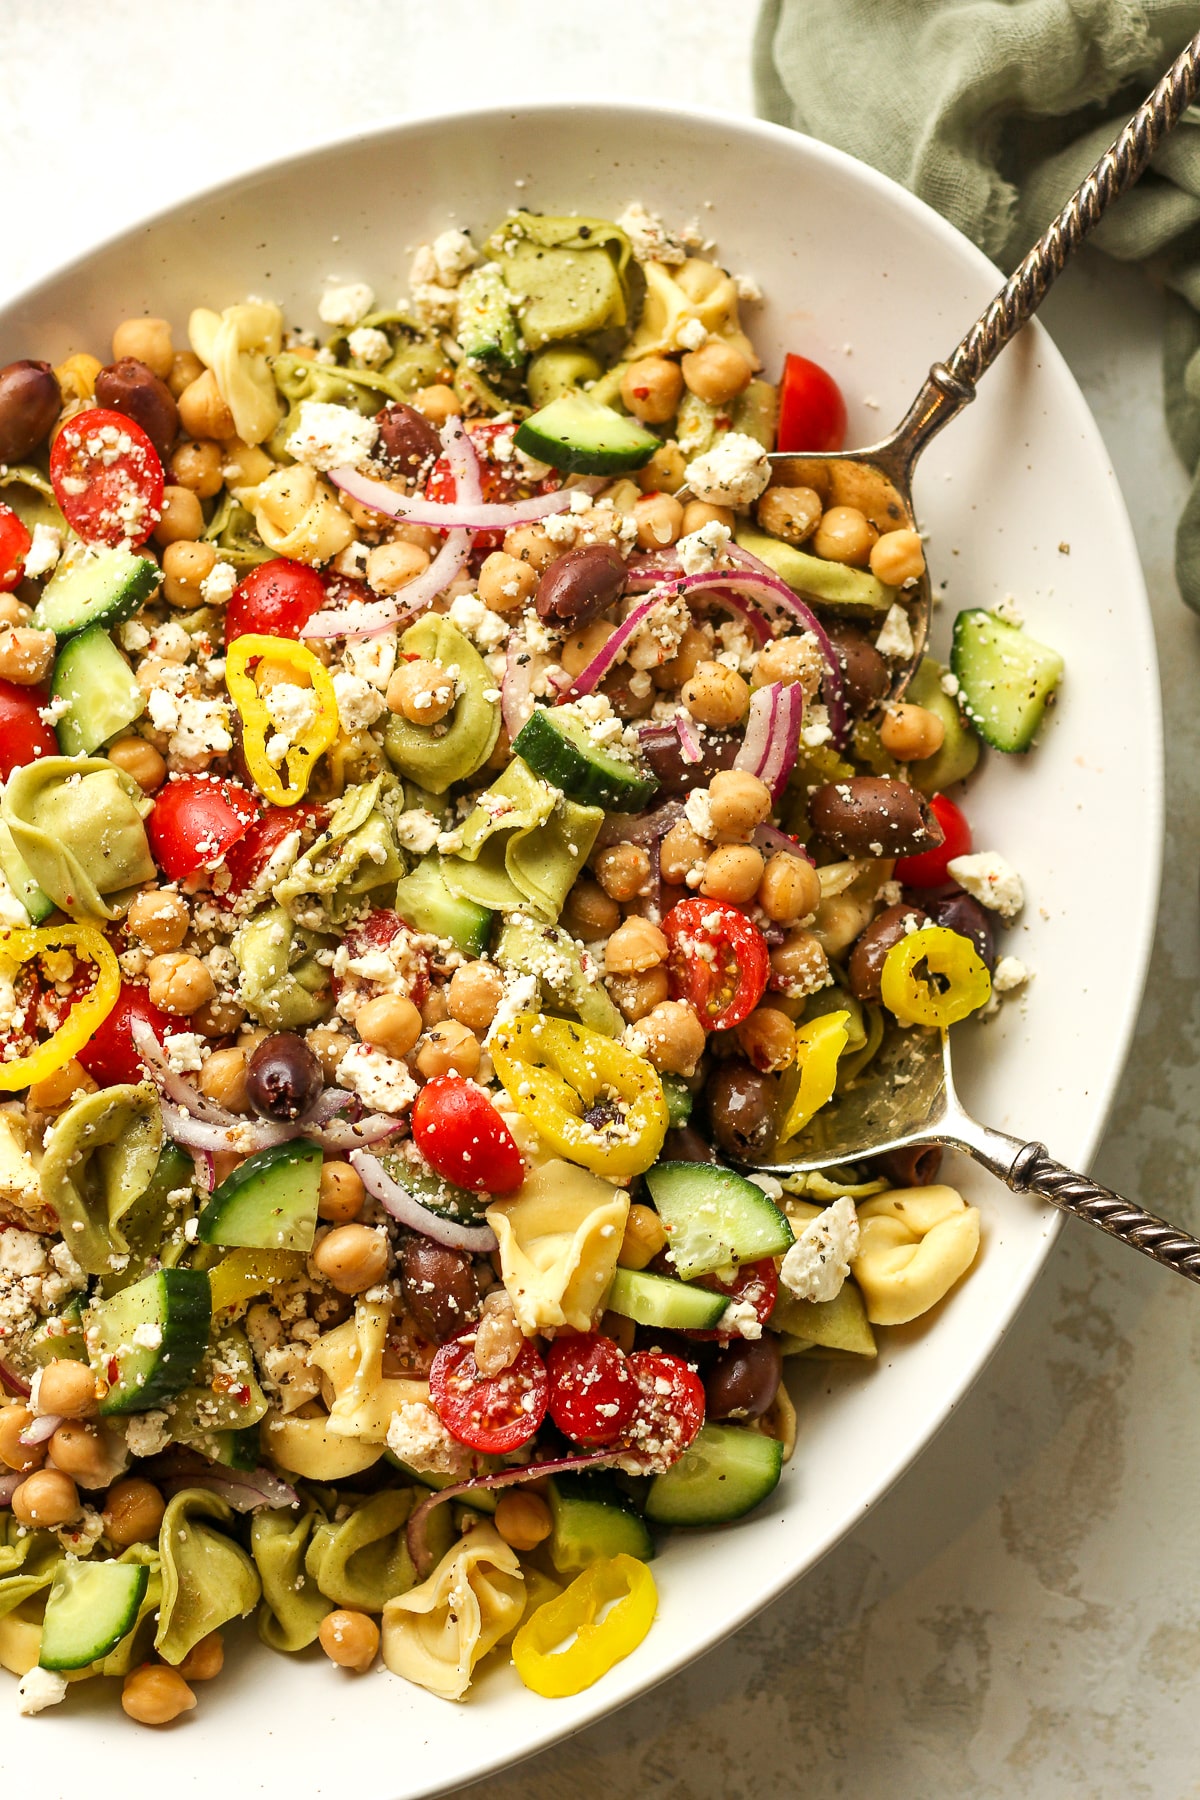 A partial bowl of pasta salad with veggies.